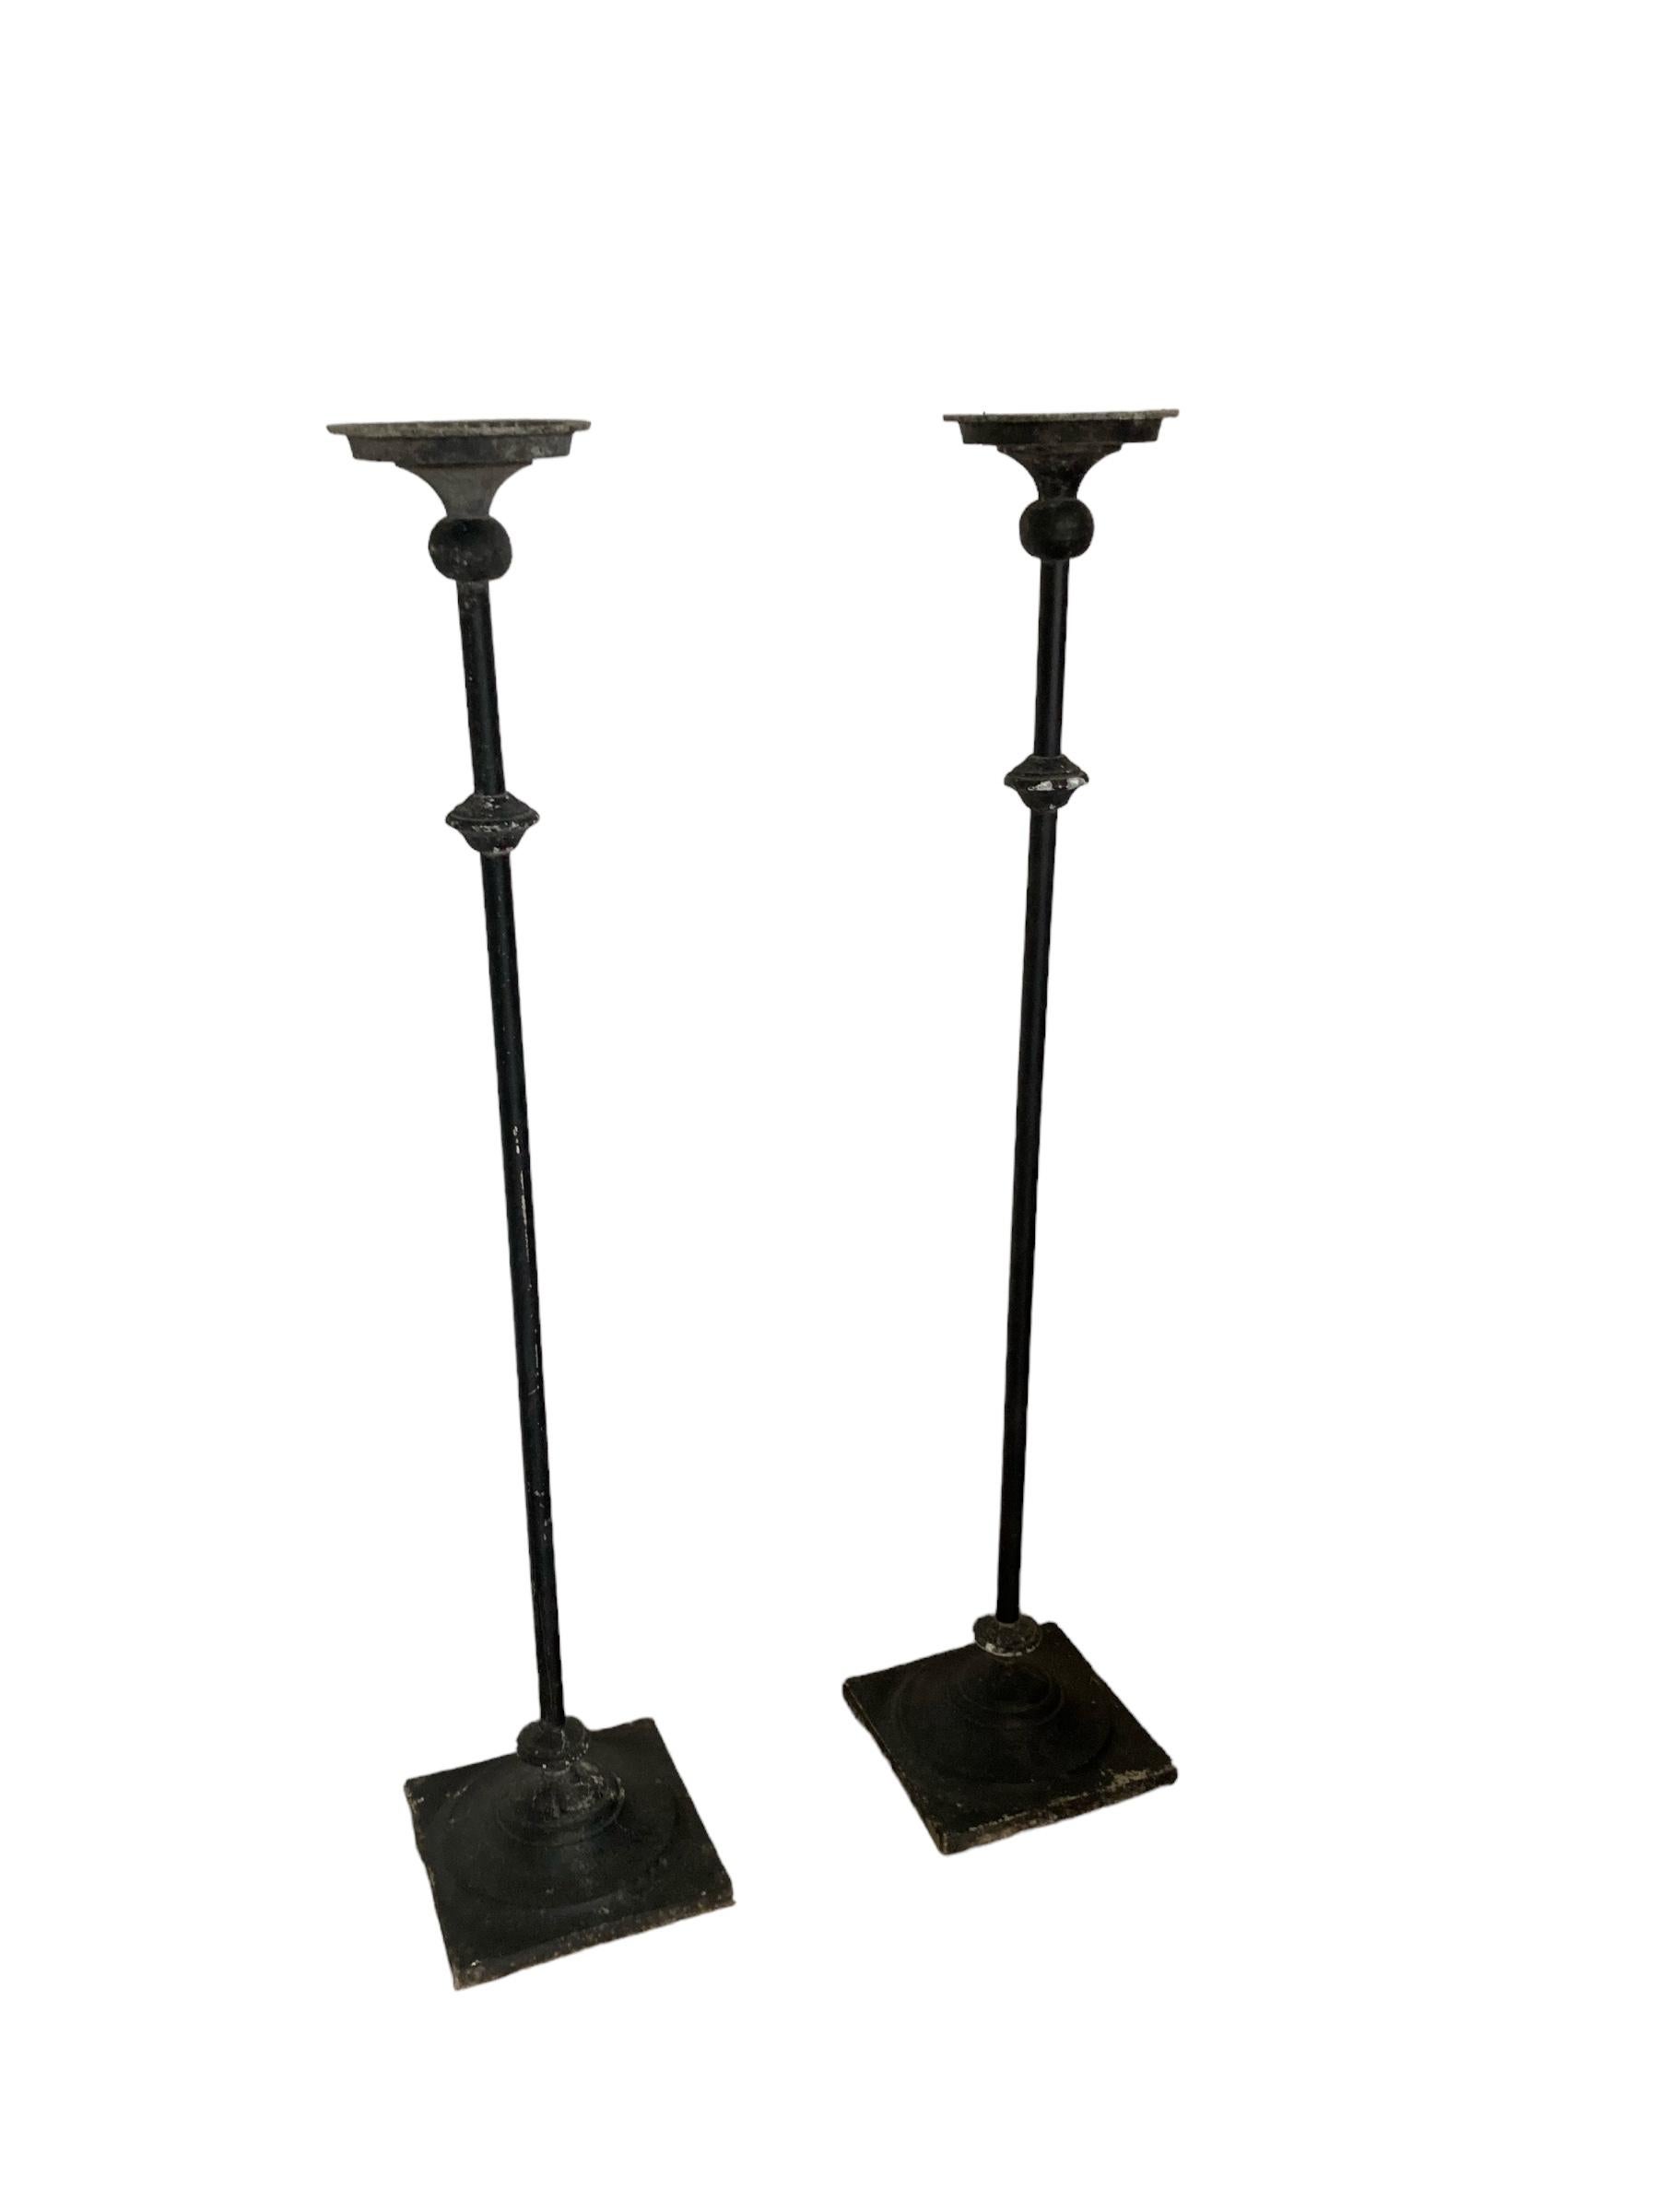 A Pair of Tall Wrought Iron Church Floor Candle Holders Gothic Style in original condition. Heavy square bases large top holders to stand large church candles. Perfect for a grand hallway or in a lounge, dining room would look great either side of a